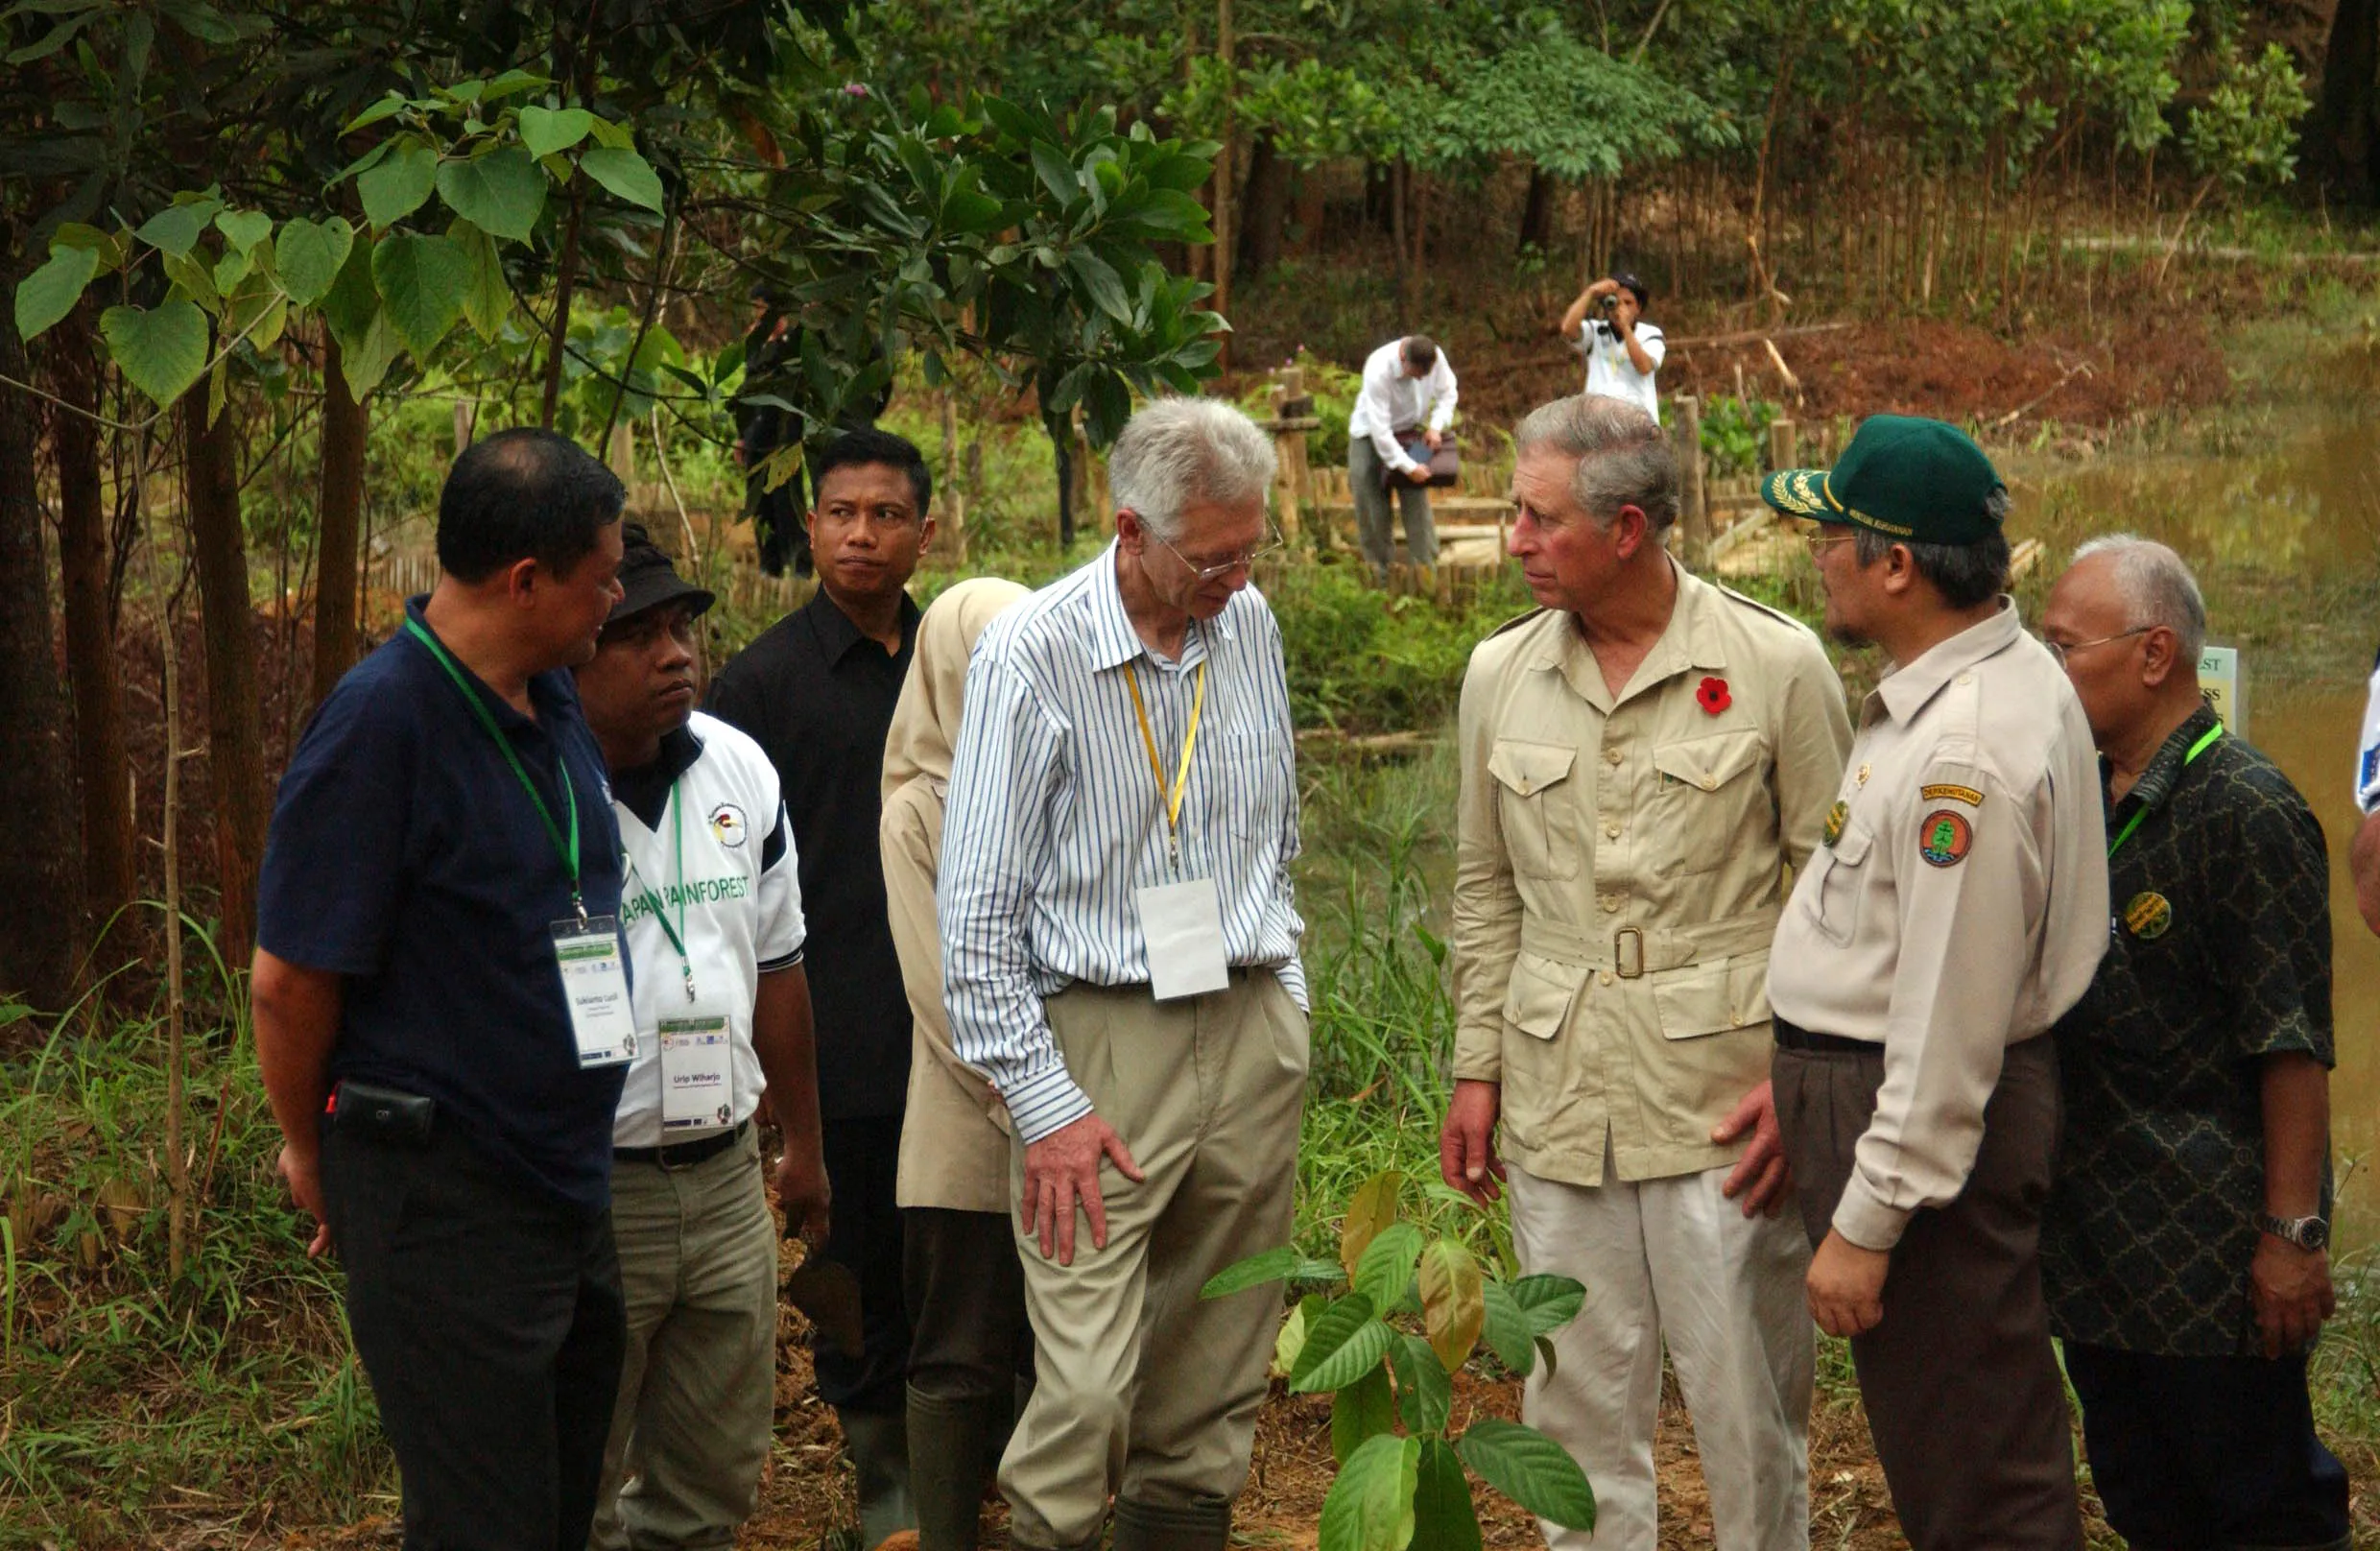 HRH King Charles visits Harapan Rainforest in Sumatra together with other conservationists including Graham Wynne CEO of the RSPB in 2008.